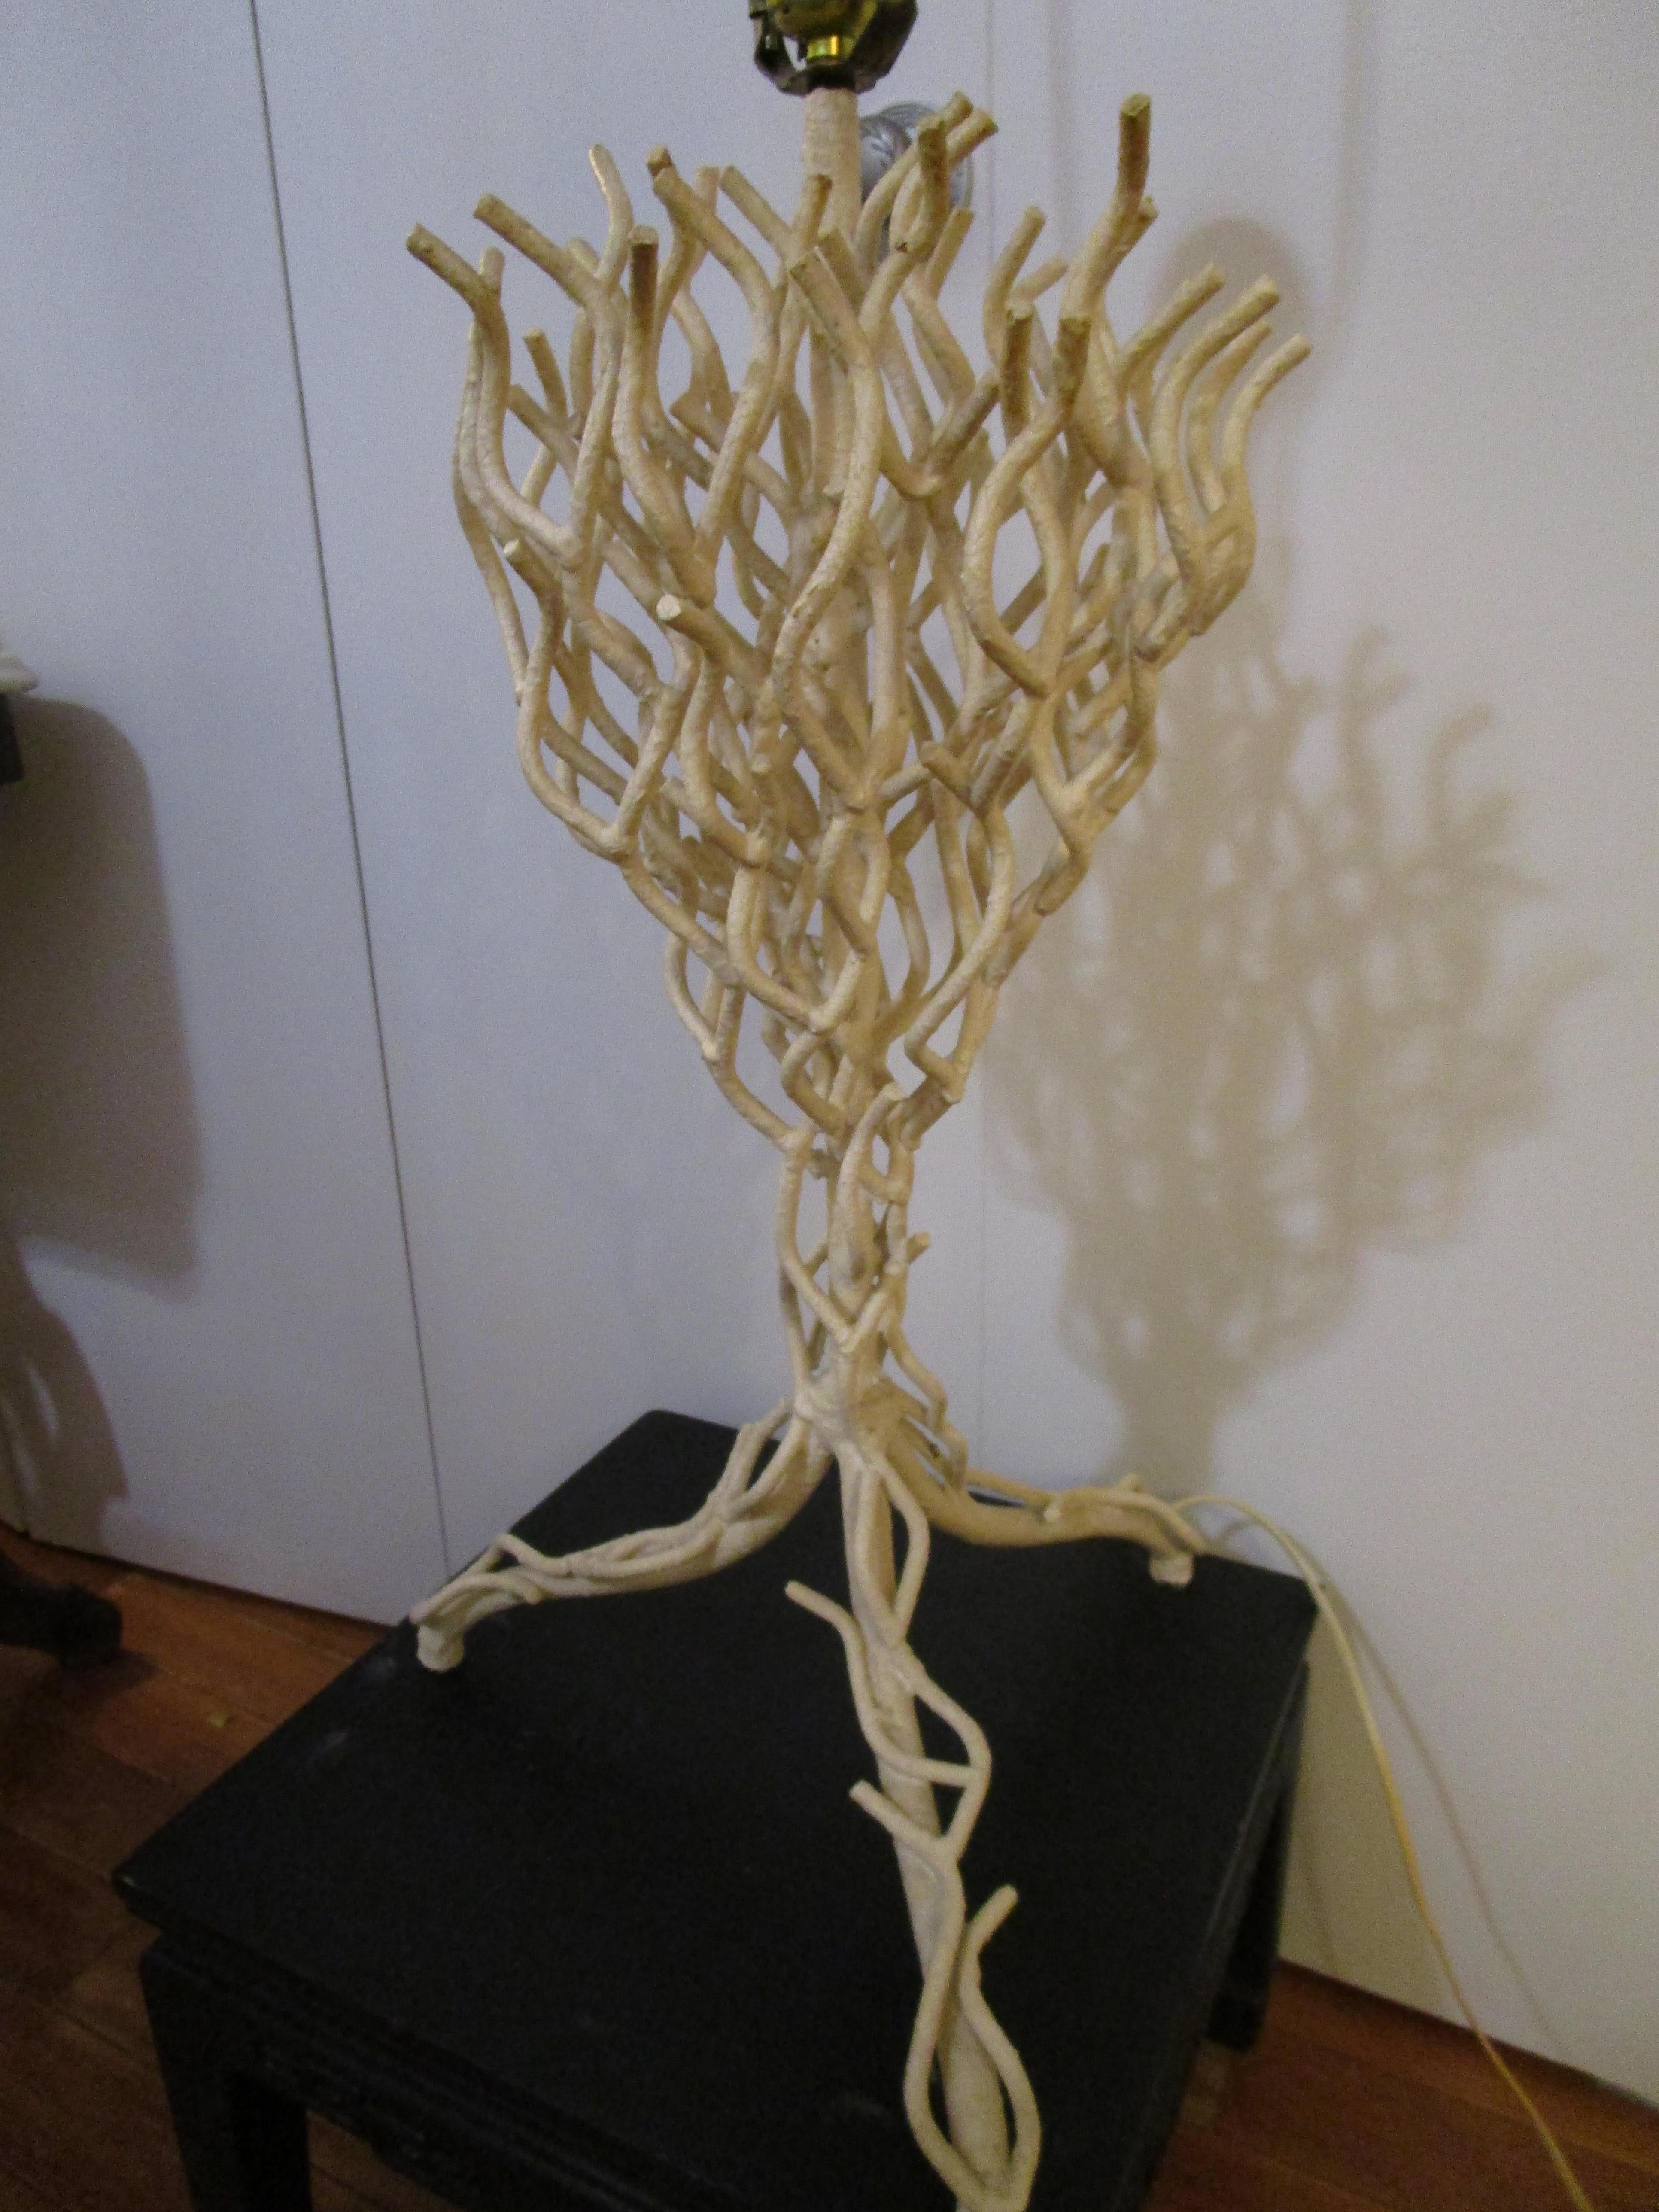 This is a rare vintage white painted twig form lamp that is made of wrought iron rendered in the most incredible coral effect. The lamps is full of possibilities. This is a designer's medium to update and change the color to silver, white or gold,